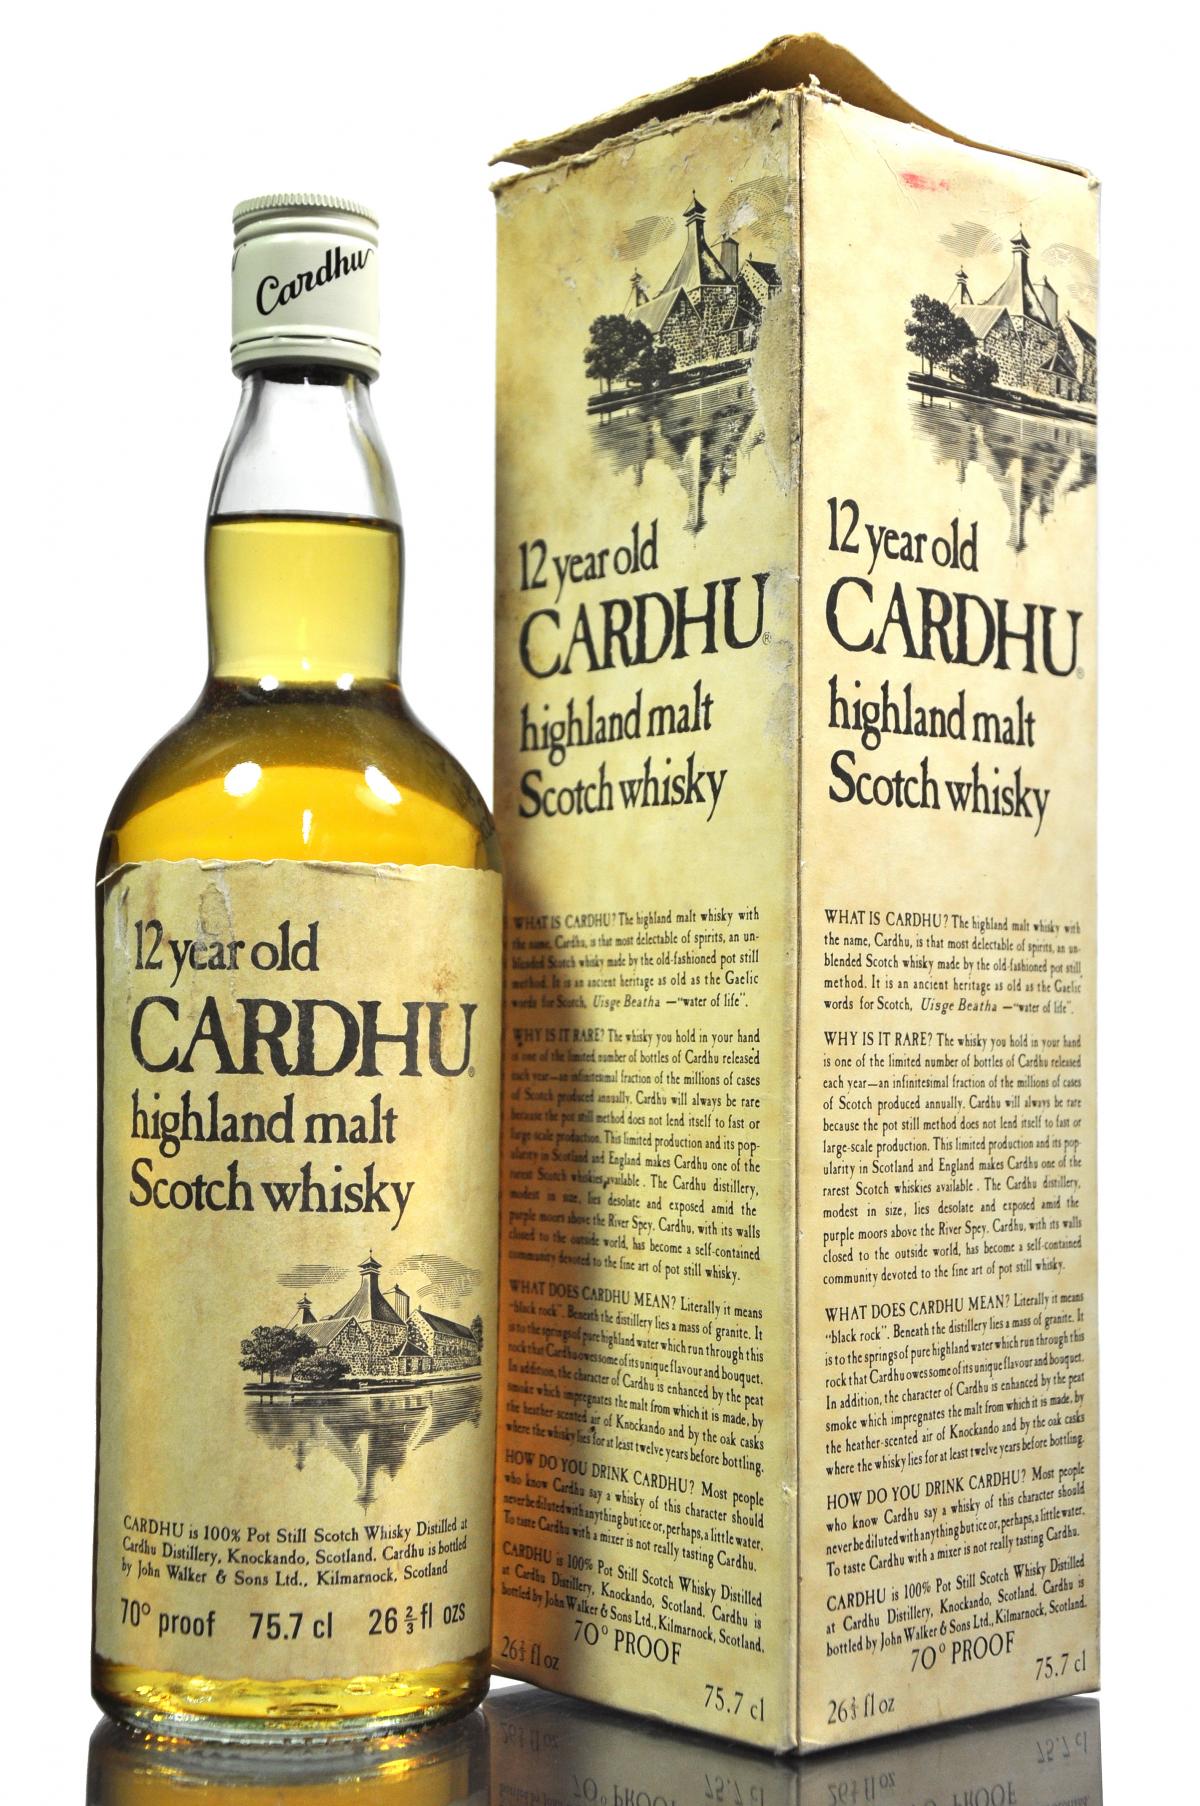 Cardhu 12 Year Old - Late 1970s